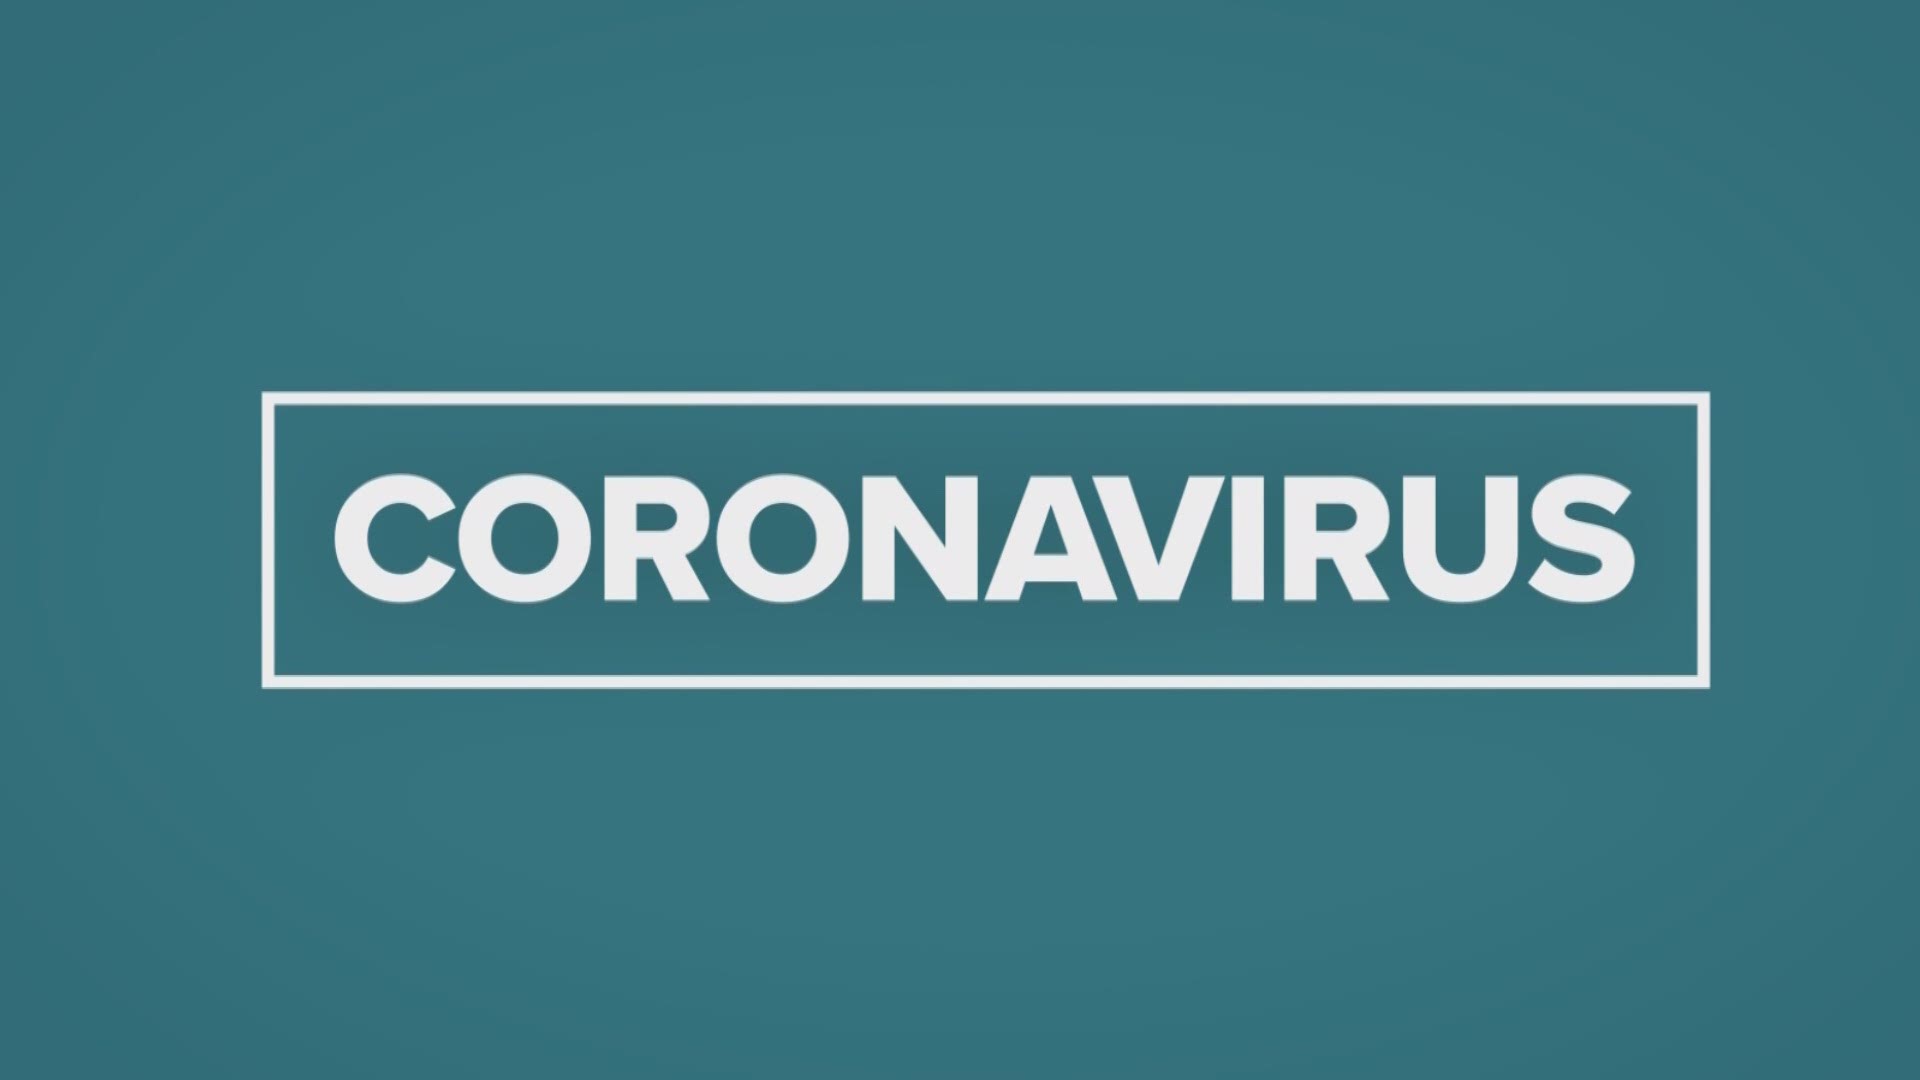 As for hospitalizations, 5,238 people in Florida were hospitalized with coronavirus as their primary diagnosis as of Sunday afternoon.